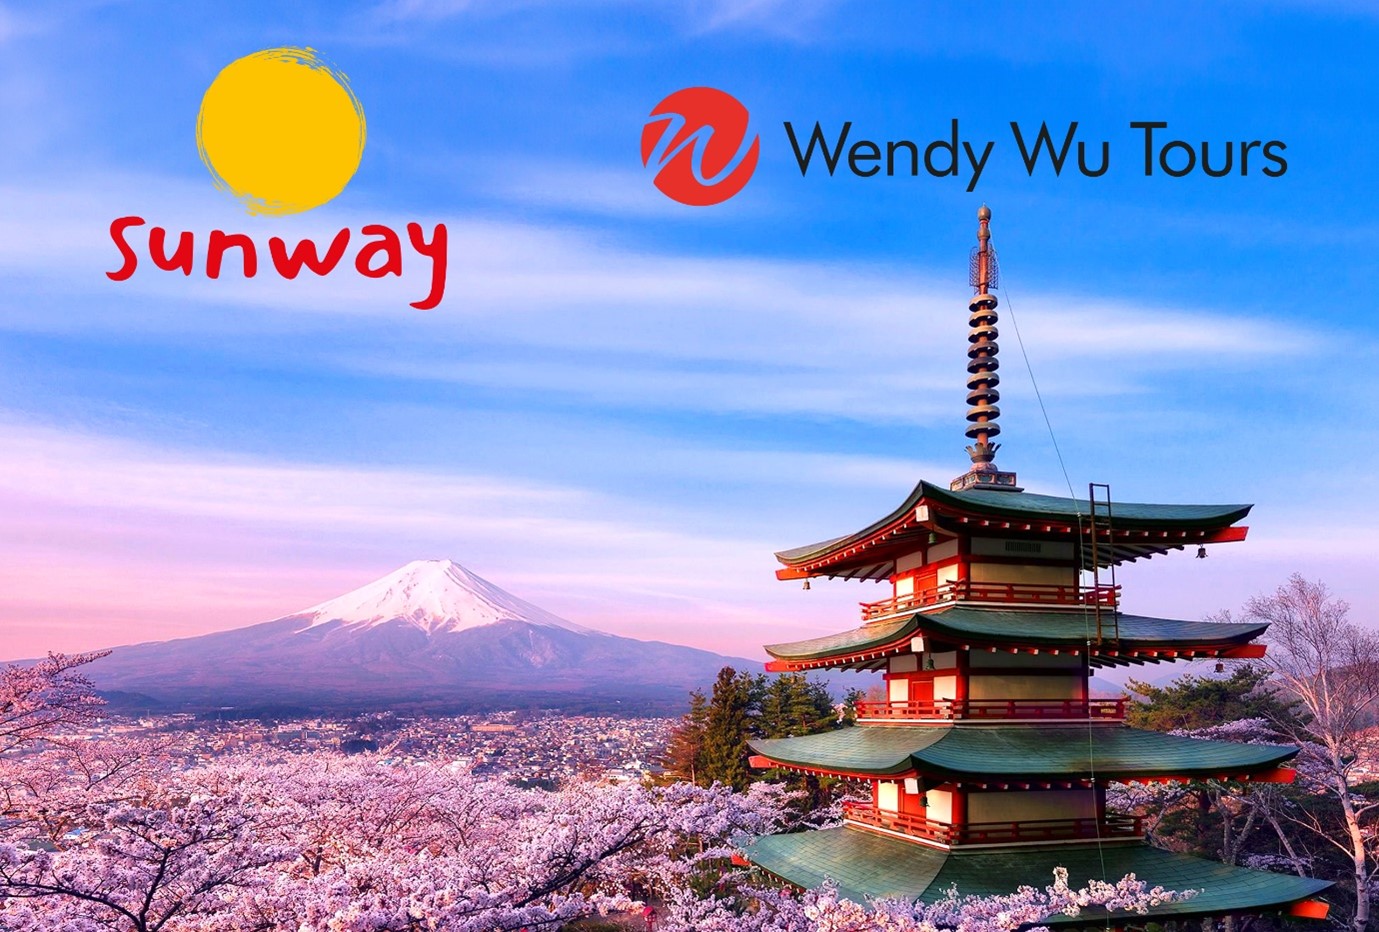 Amazing Wendy Wu Tours Offers with Sunway